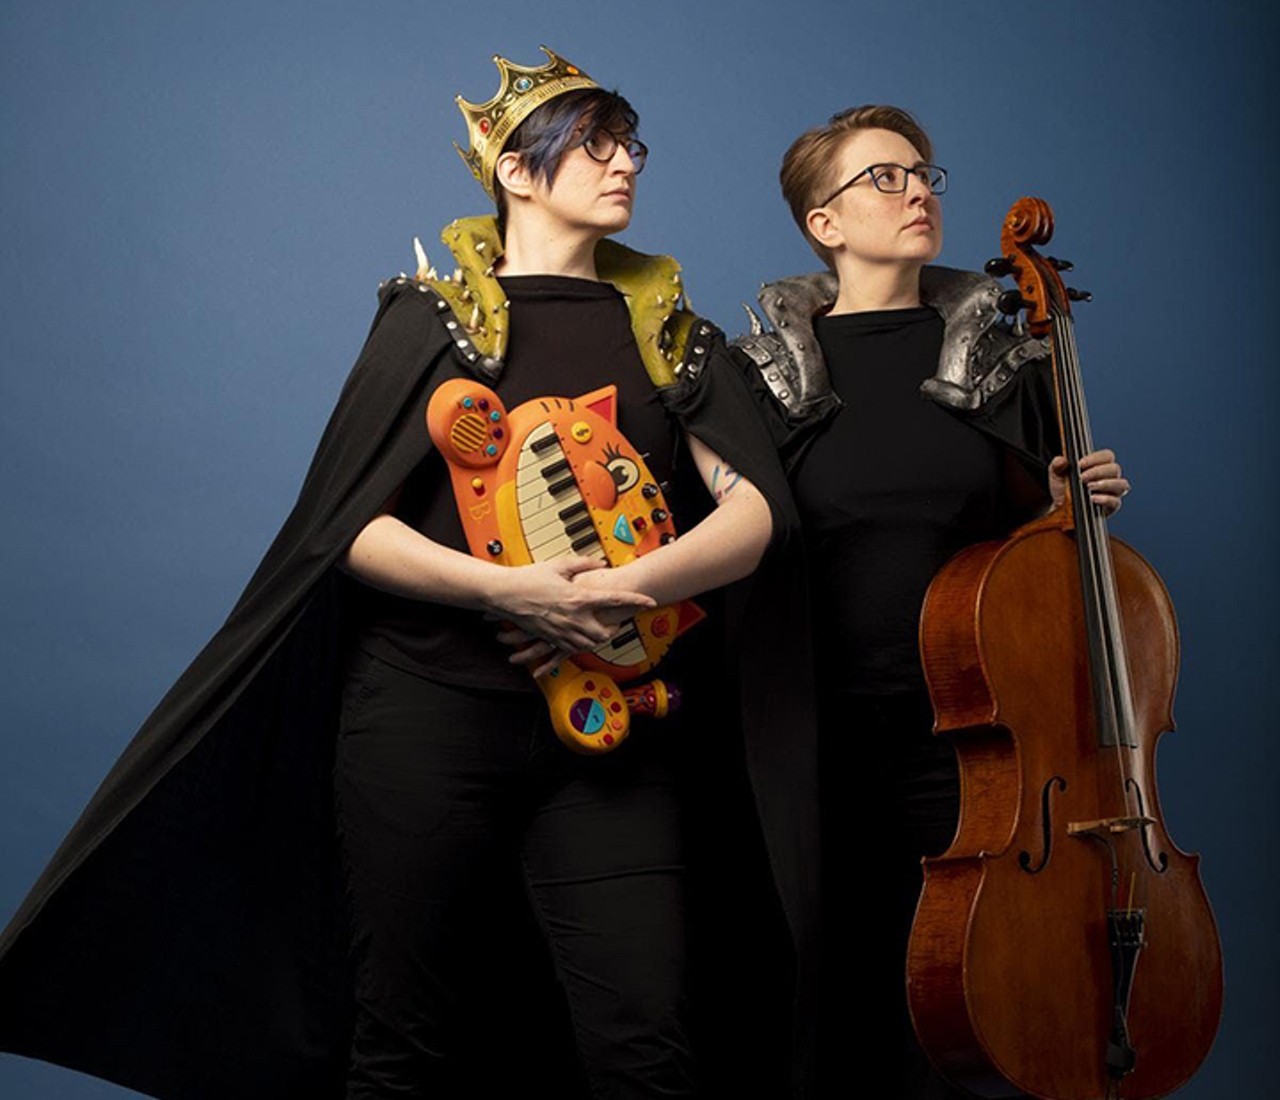 Wednesday, May 22The Doubleclicks at the Cloak & Blaster